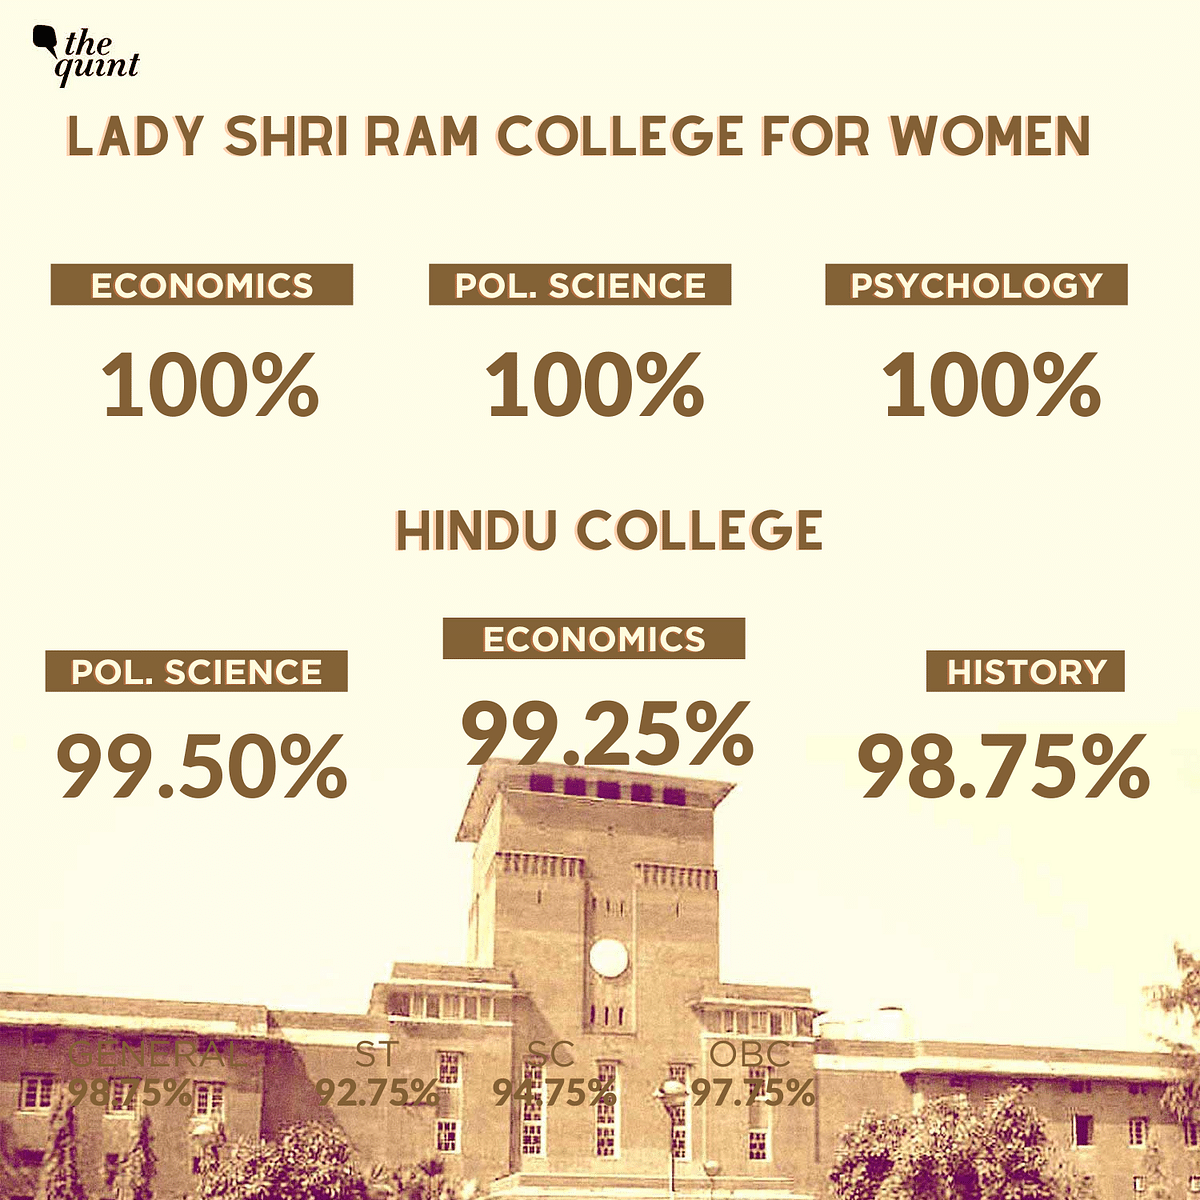 The first cut-off for Economics, Political Science, and Psychology at Lady Shri Ram College has closed at 100%.